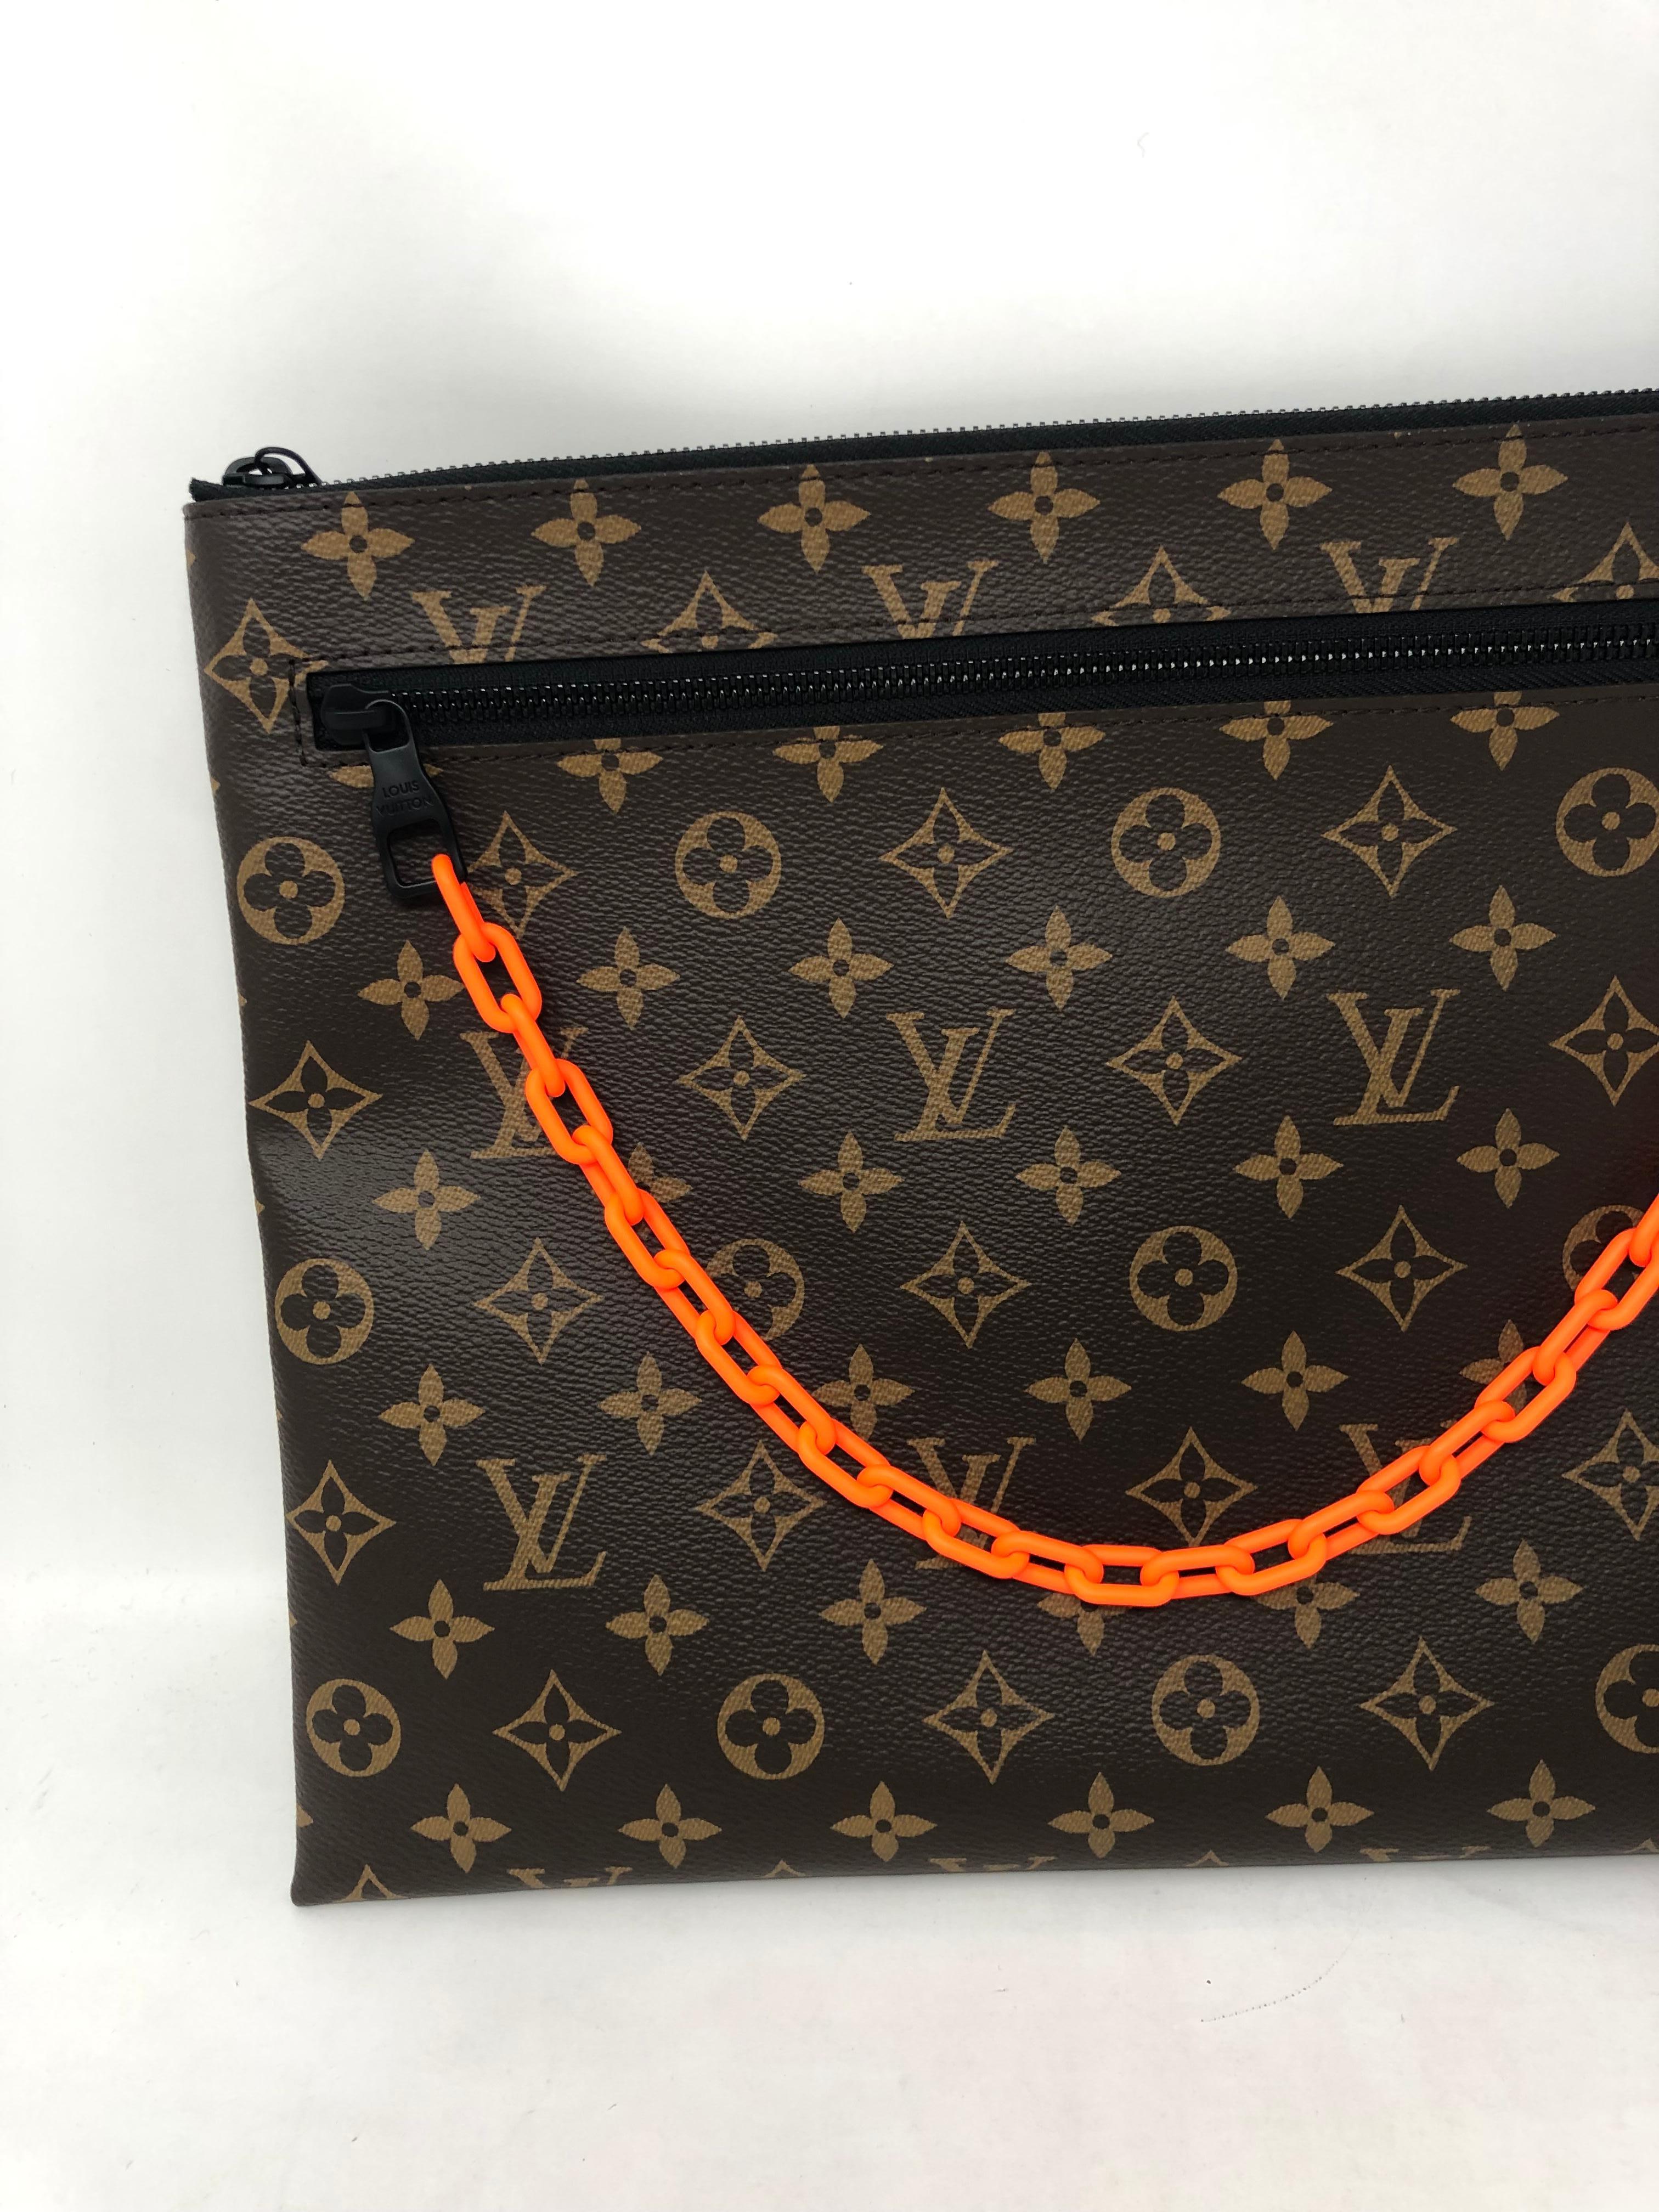 Louis Vuitton Pochette SS19 Virgil Abloh Monogram Chain Canvas Clutch. Brand New. Extremely limited from Pop Up at LV. Iconic piece from Virgil Abloh's first line at Louis Vuitton. Unisex design can be used as a laptop holder or clutch. Includes